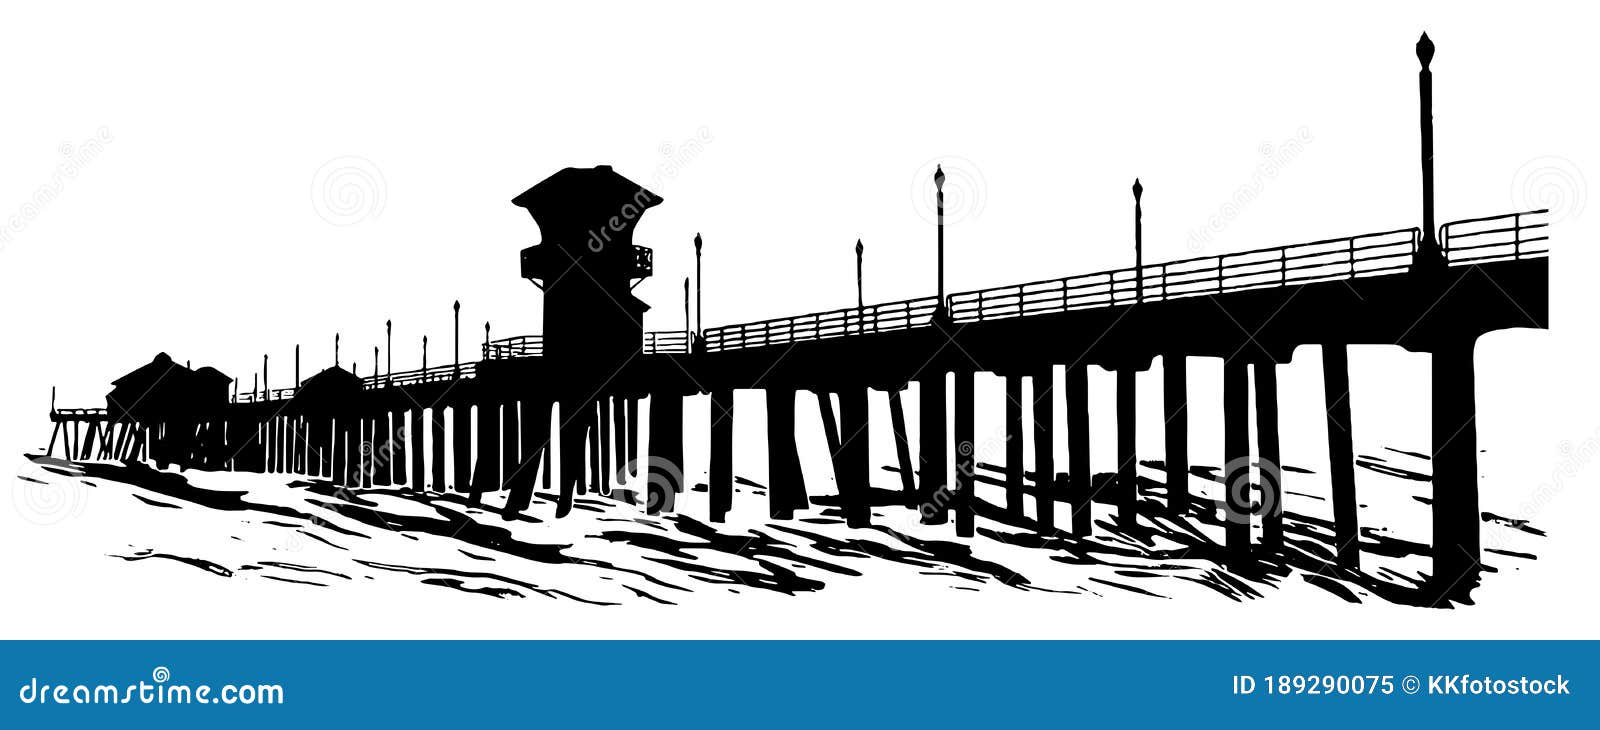 silhouette of a pier with waves